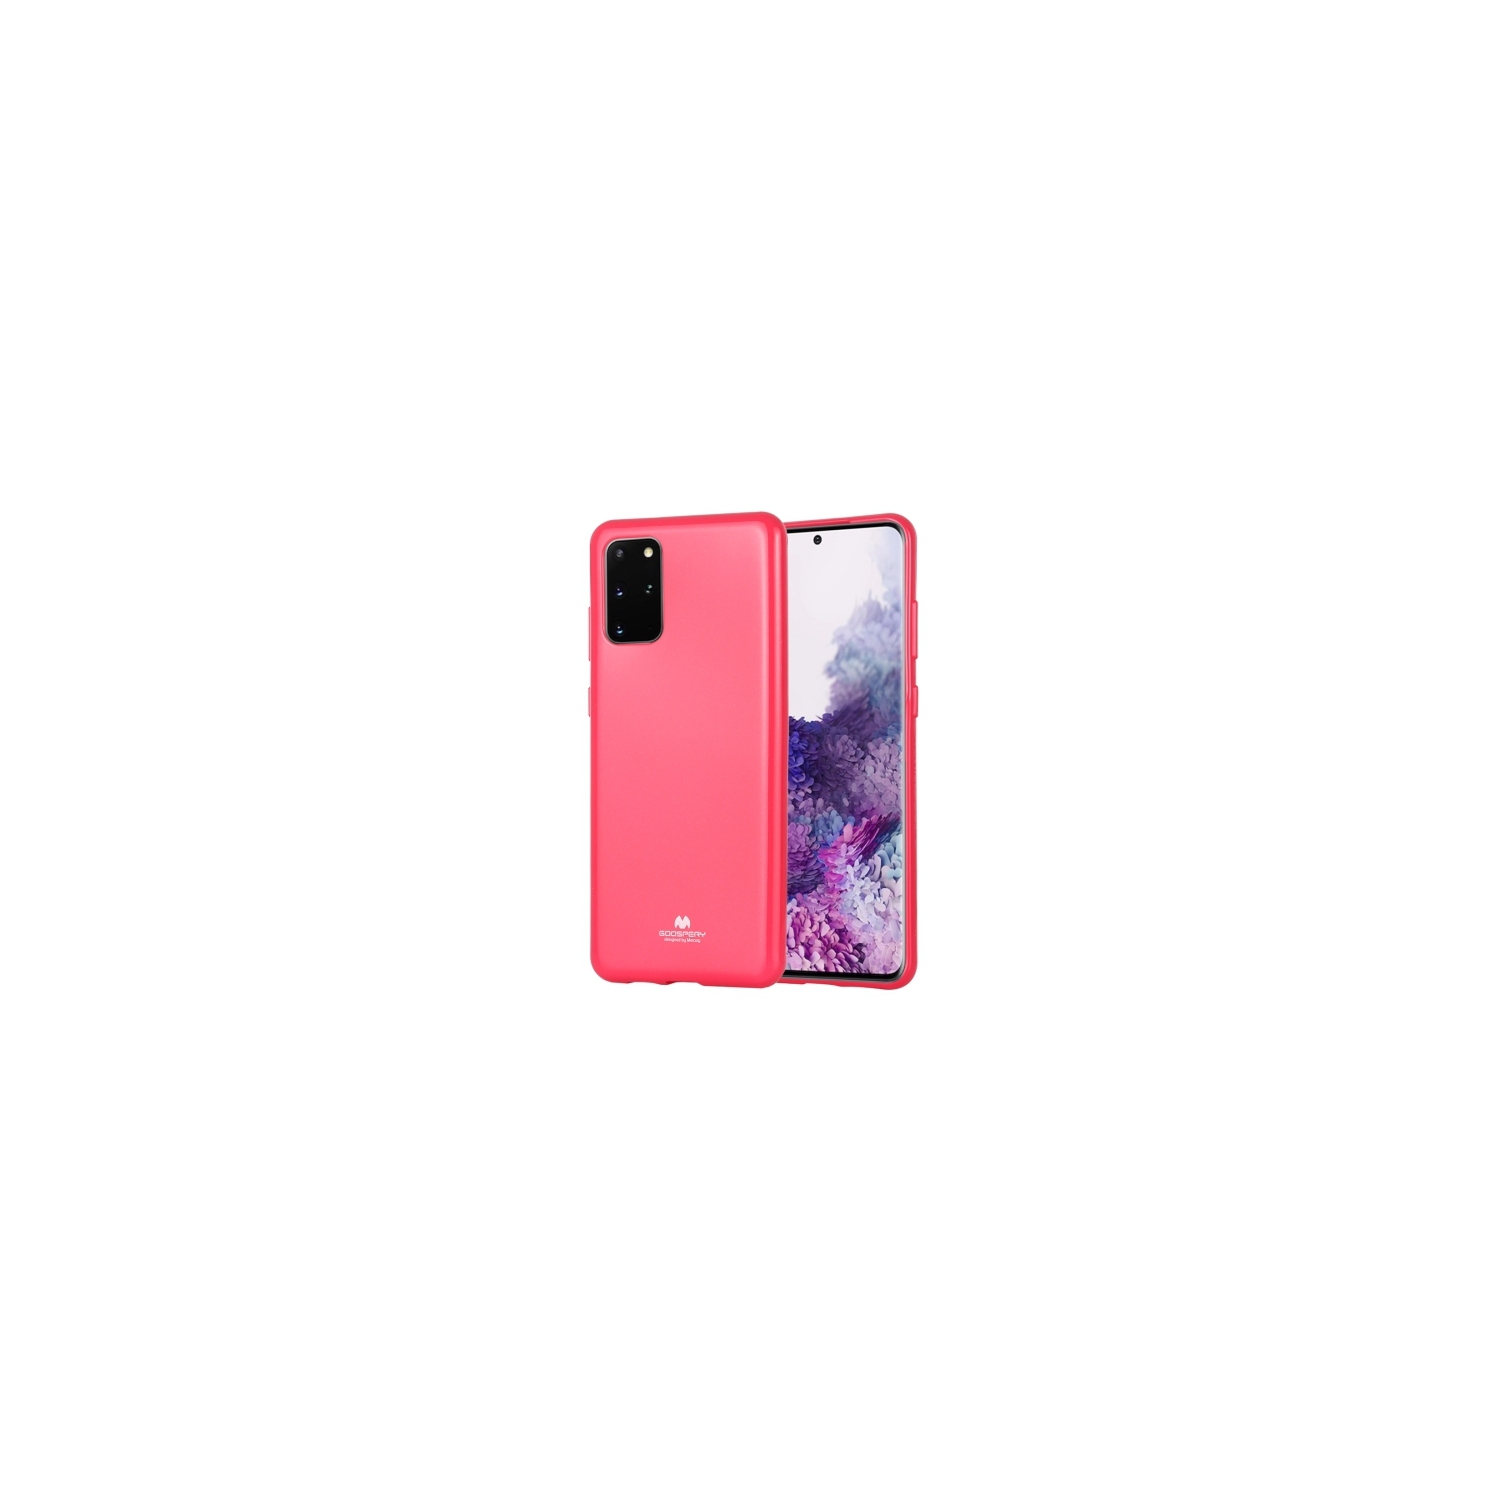 TopSave Goospery Jelly Case For Huawei P40 Pro, Hot Pink